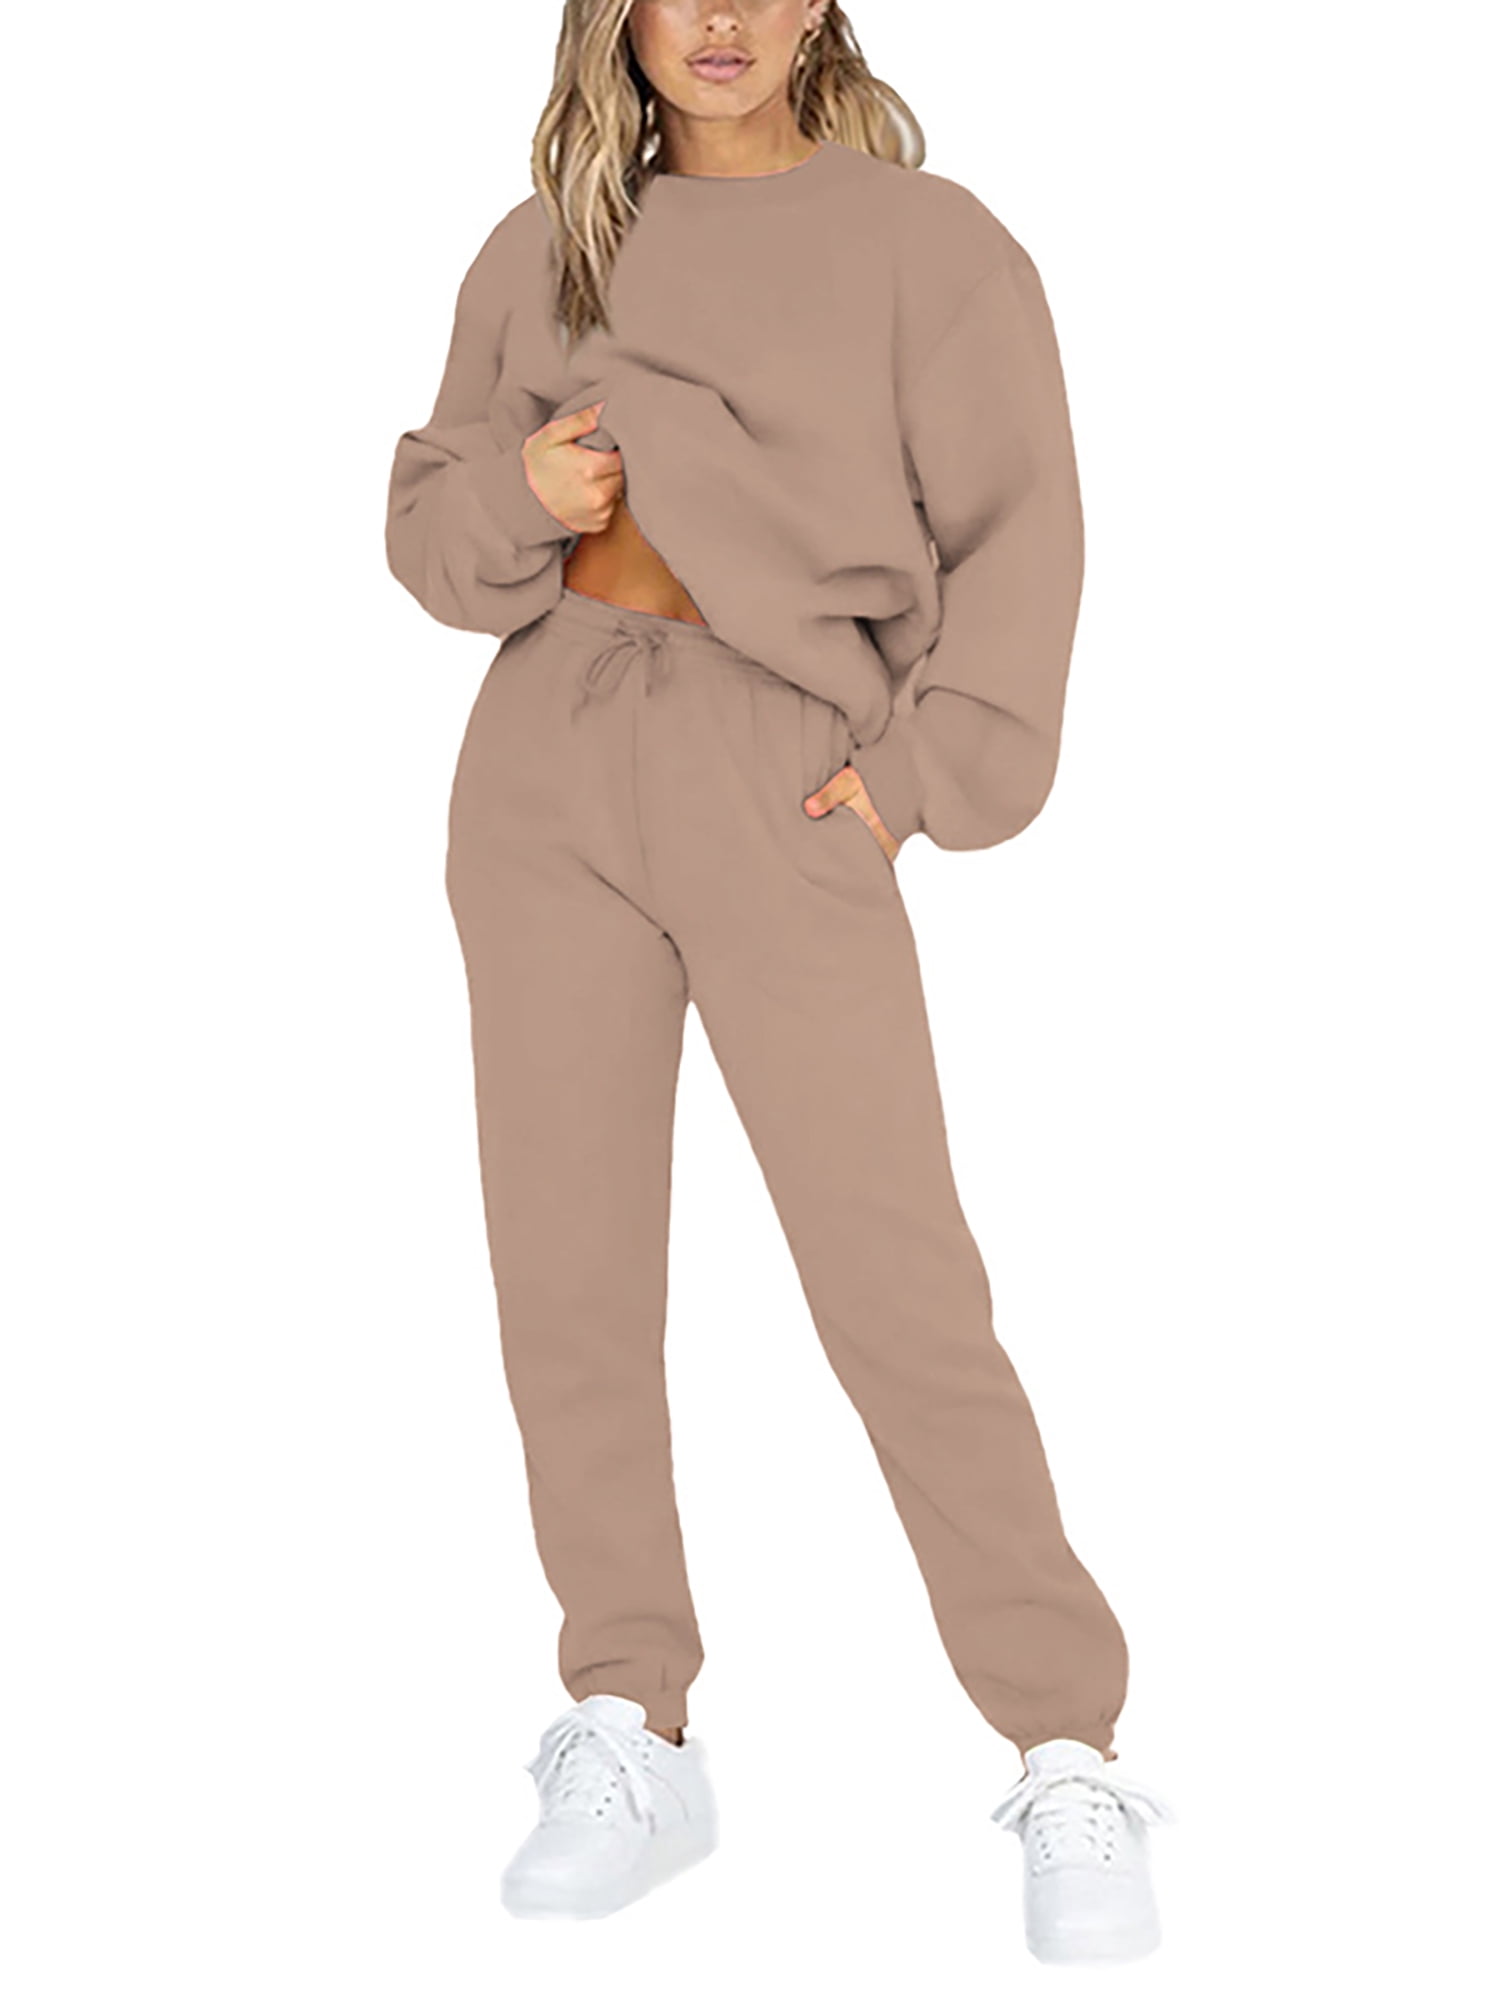 Printed Sweatsuits/Separates - Sweatsuits - Women's Adaptive Adaptive  Clothing for Seniors, Disabled & Elderly Care